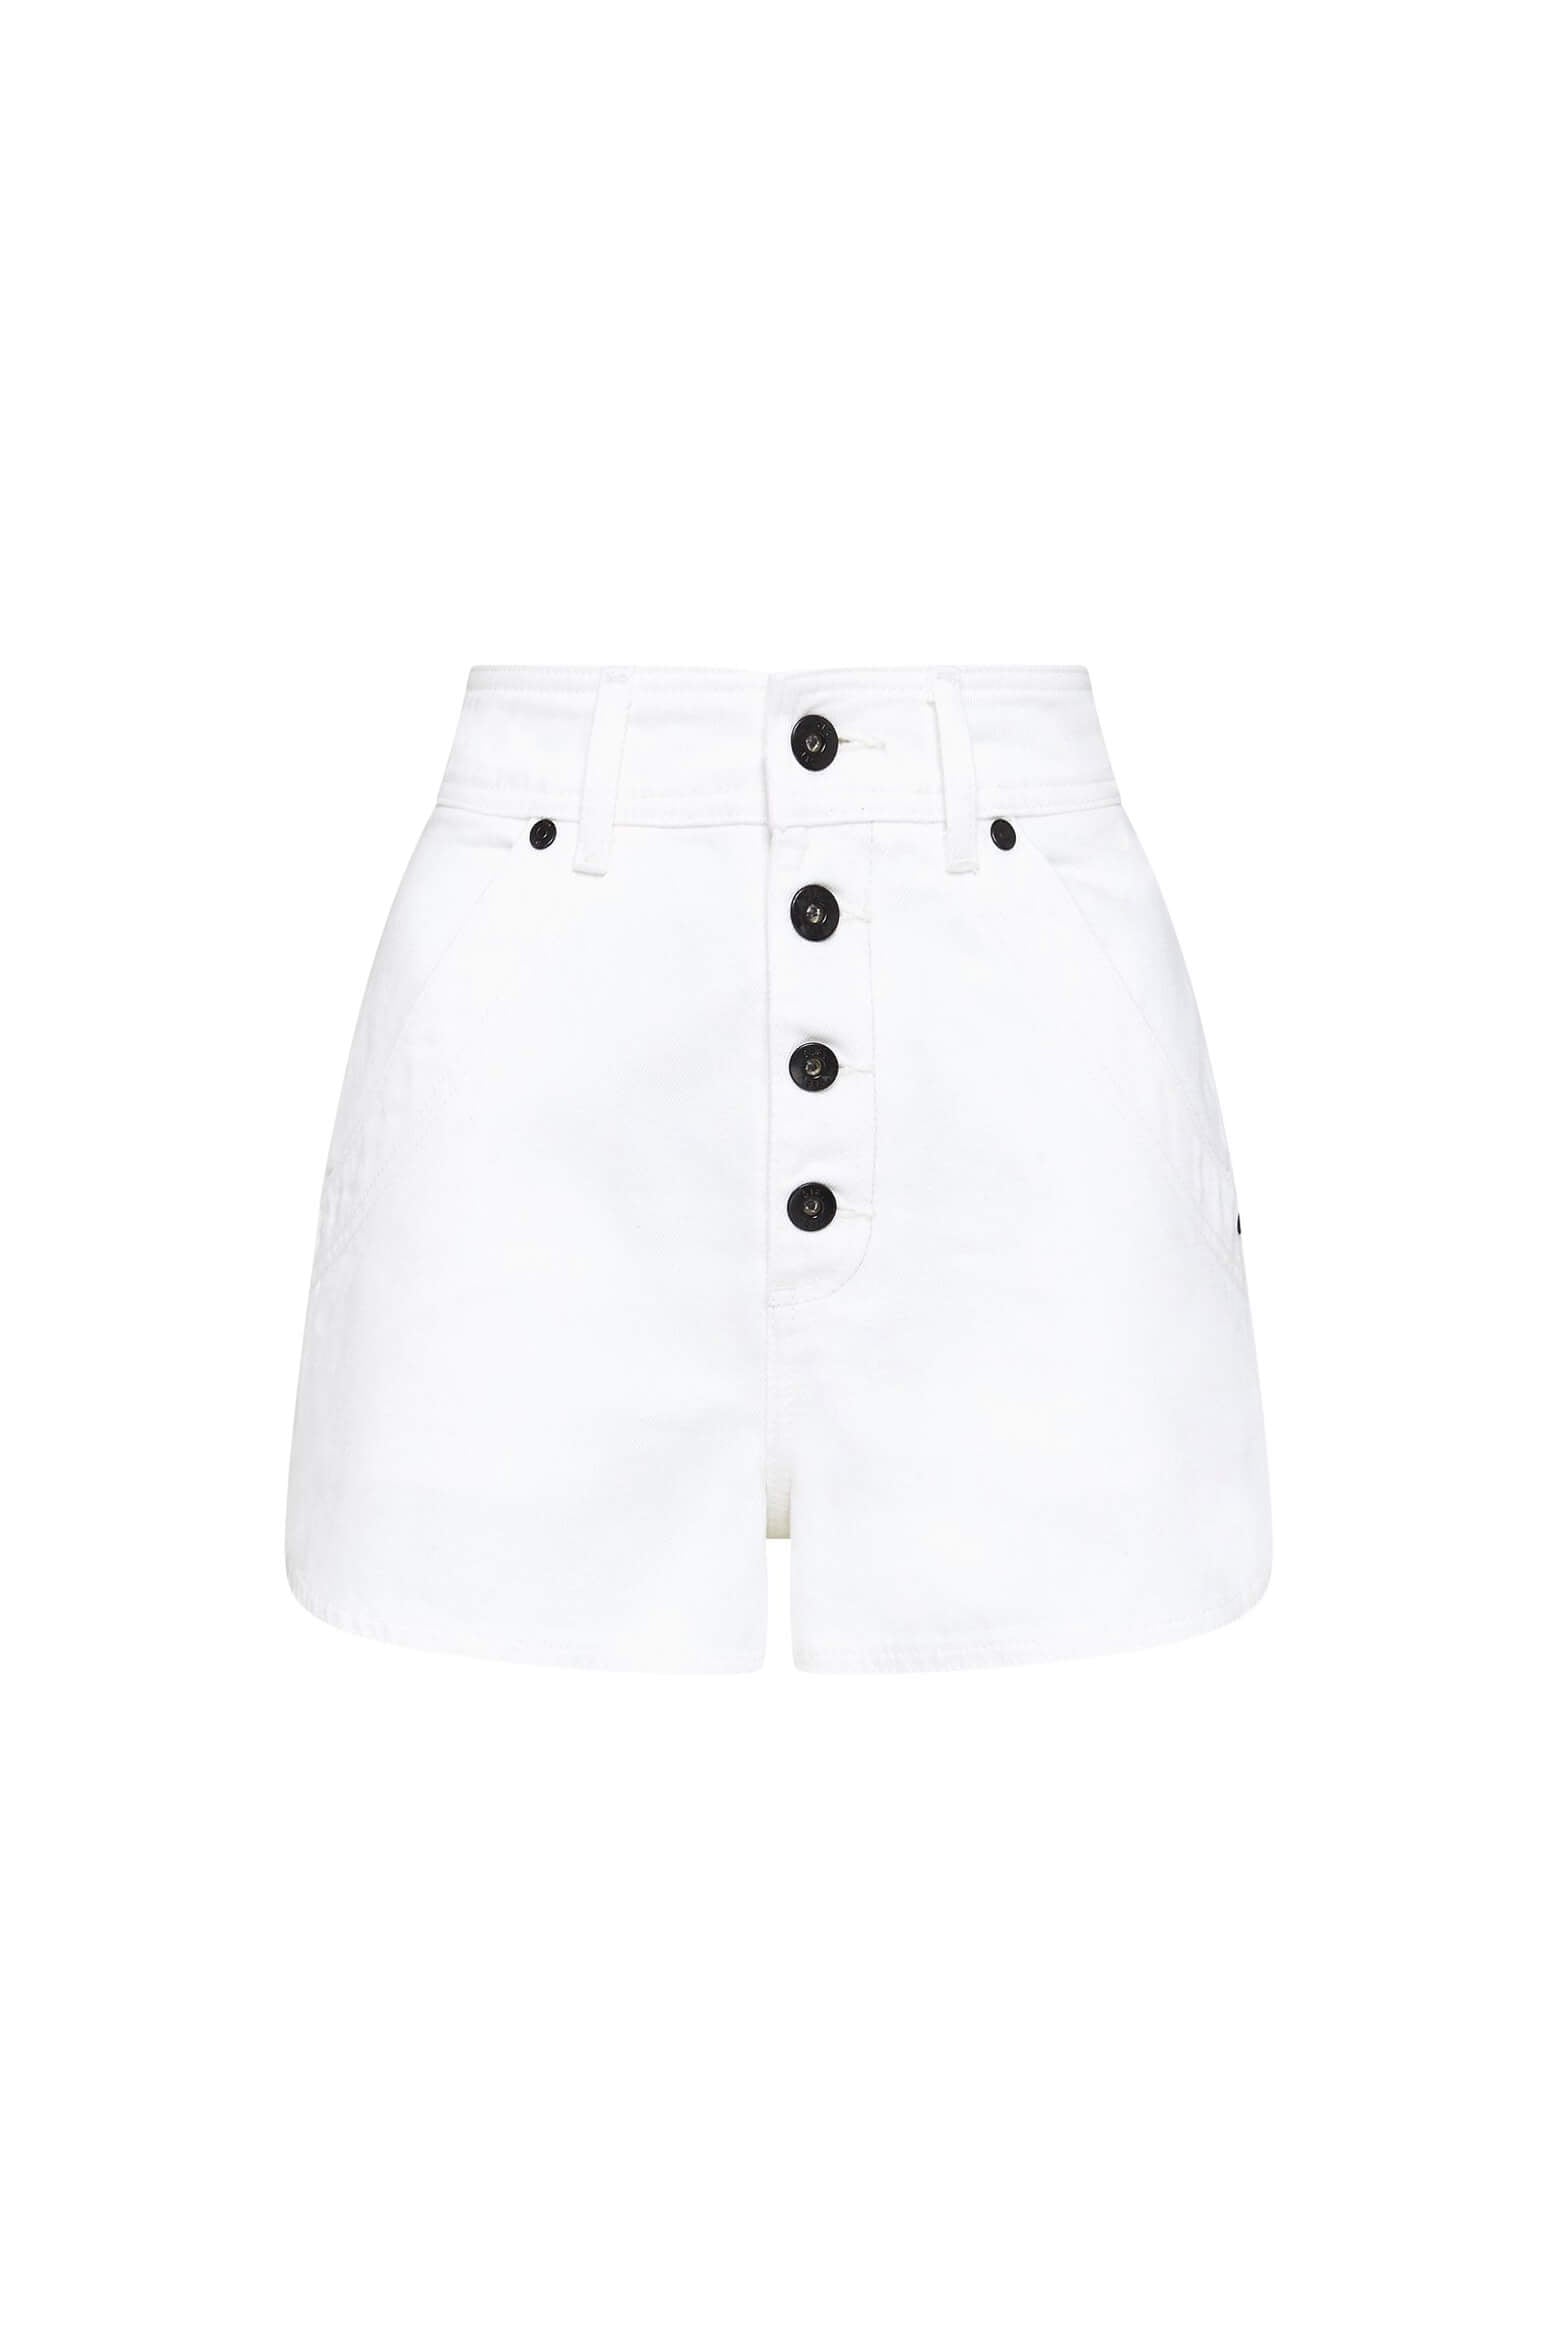 Sir The Label Classic Mini Shorts in White from The New Trend